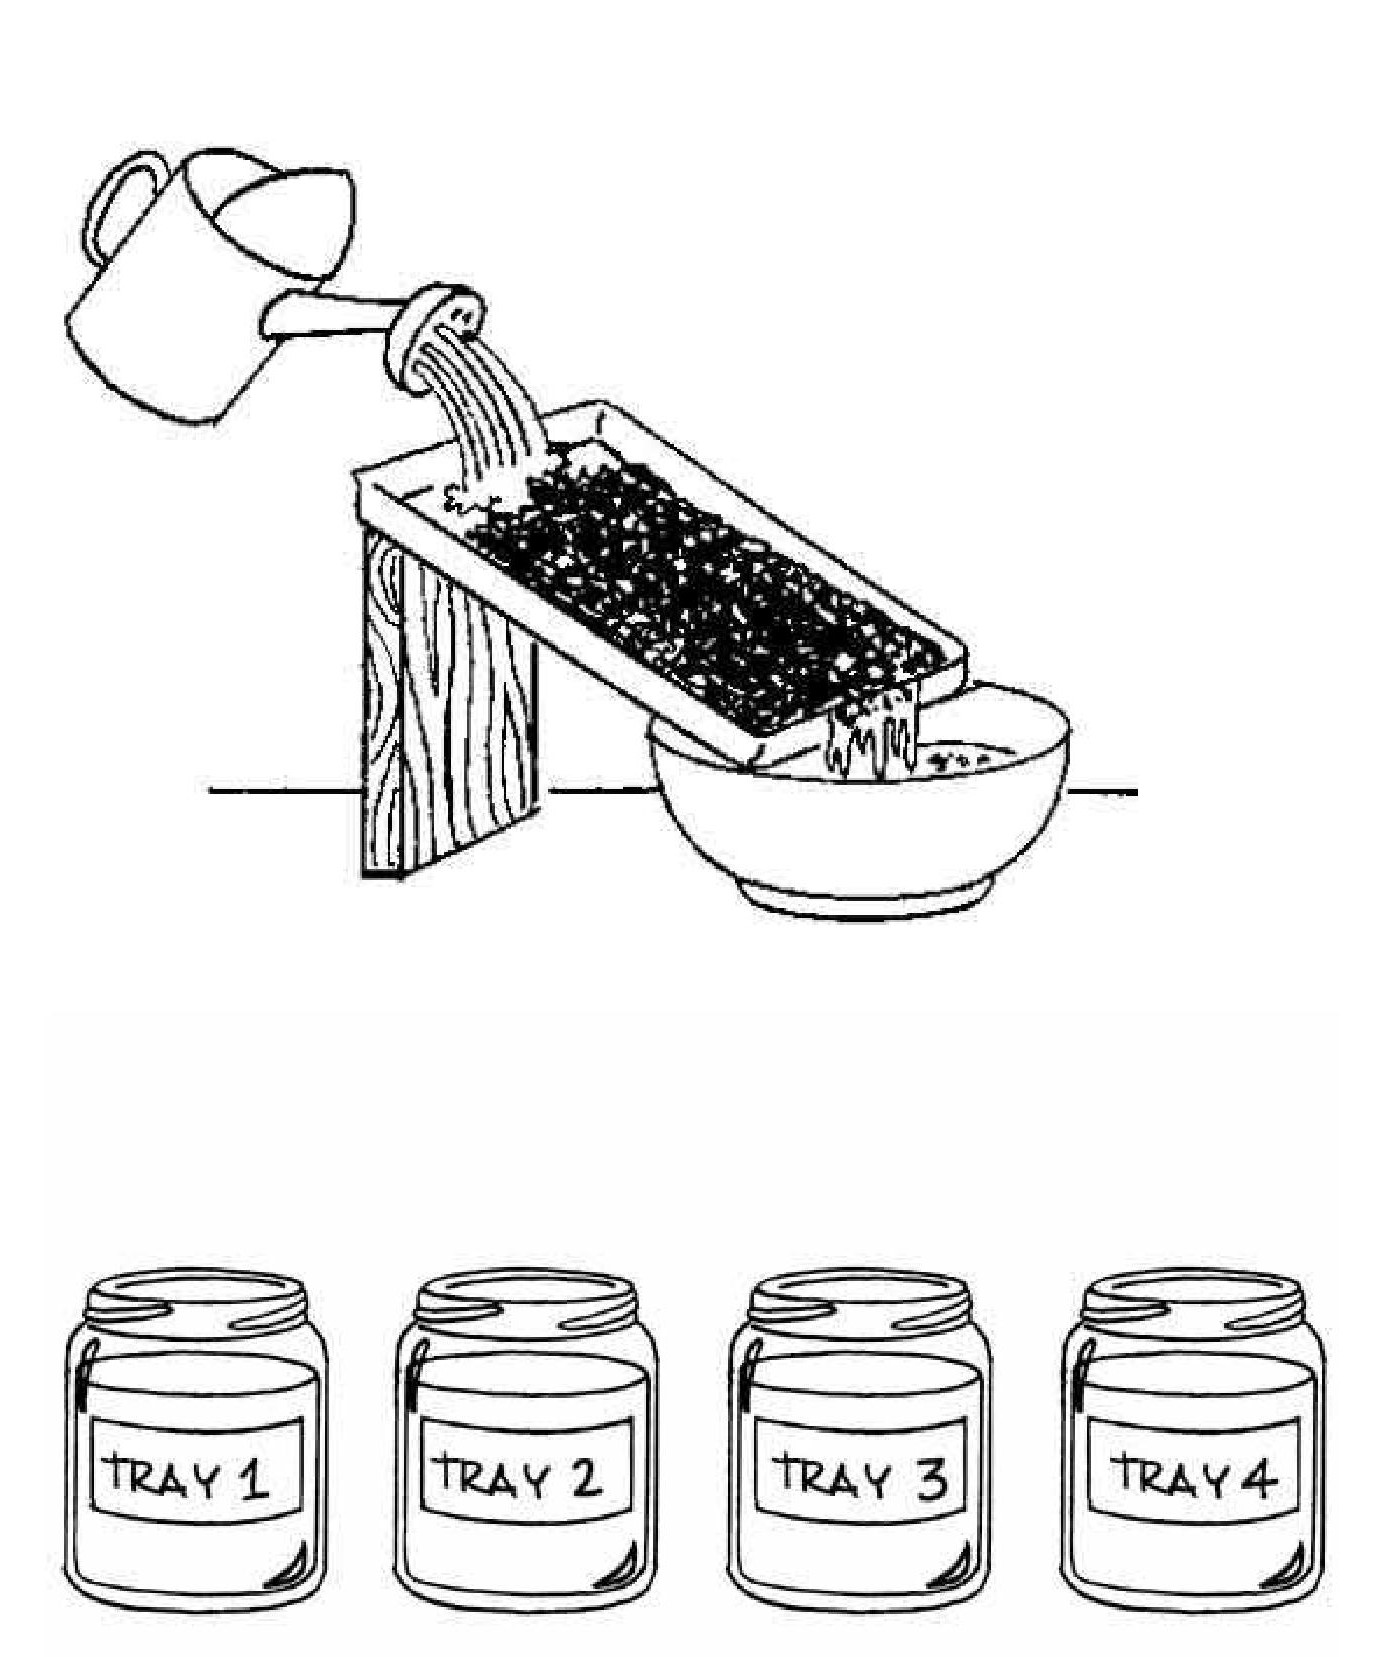 Erosion experiment illustration shows a watering can emptying into a pan fill with soil, which is then emptied into a bowl.